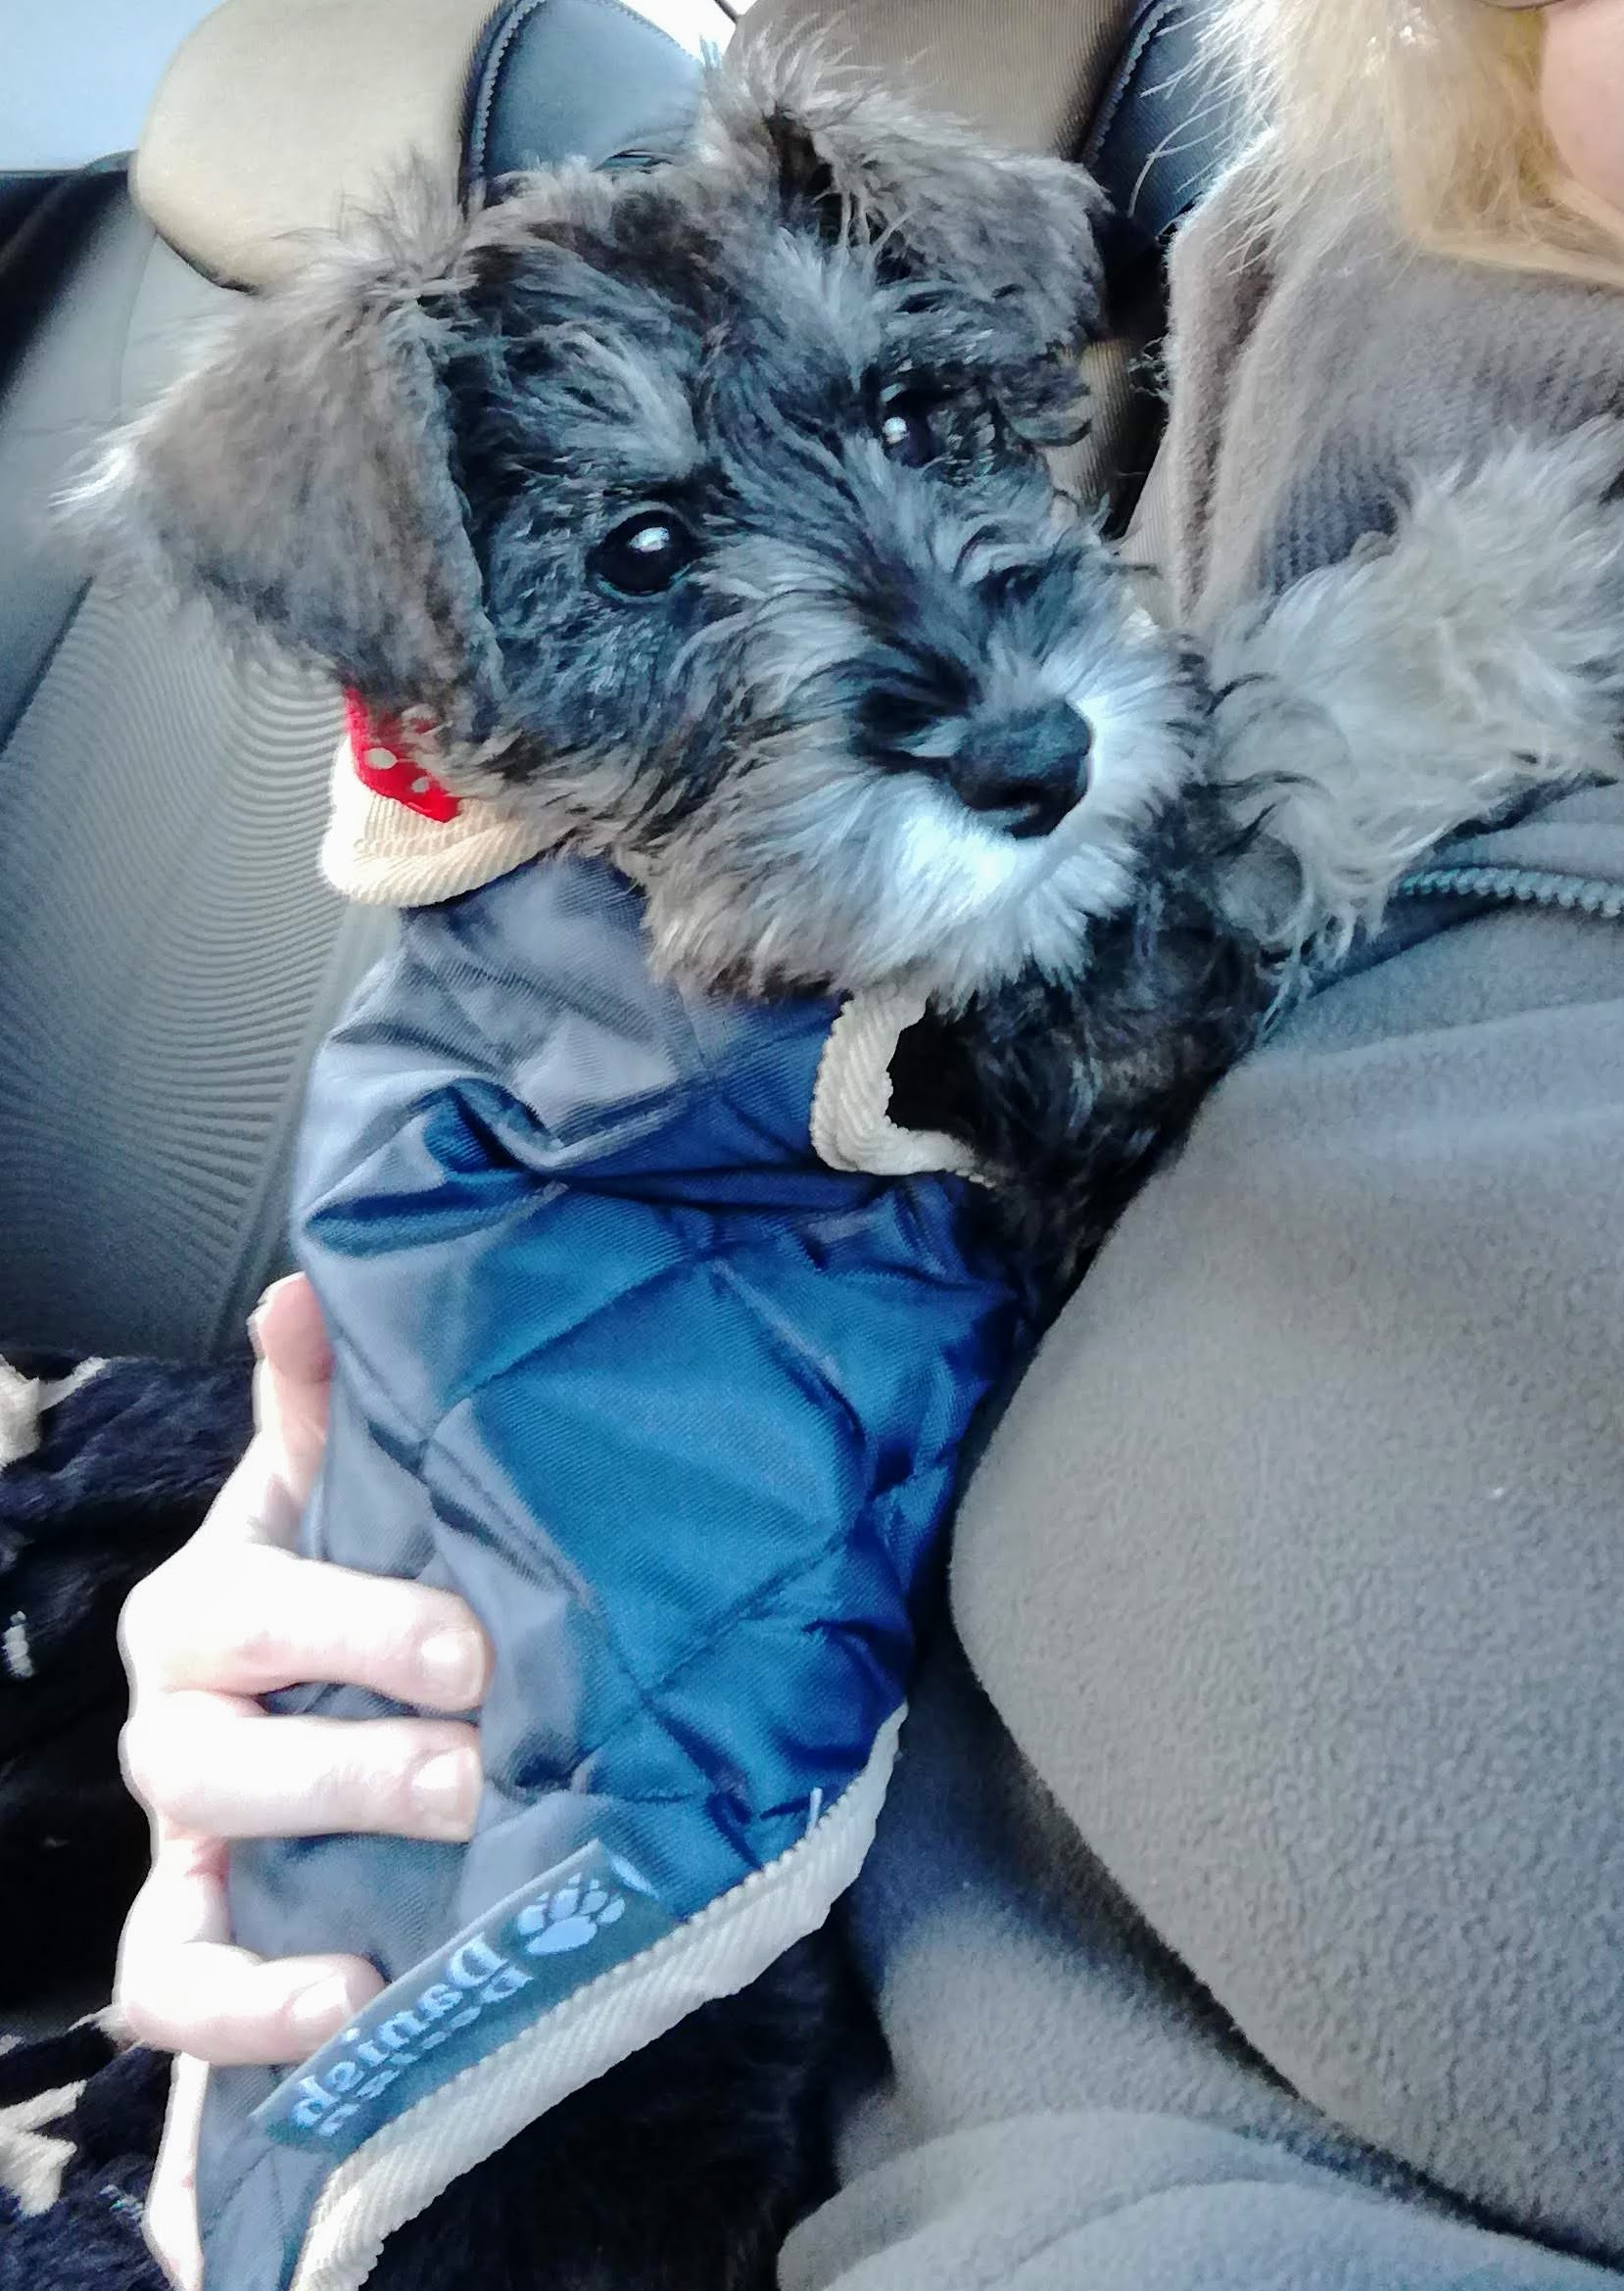 A Schnauzer puppy wearing a jacking while leaning on the side of a woman sitting in the backseat